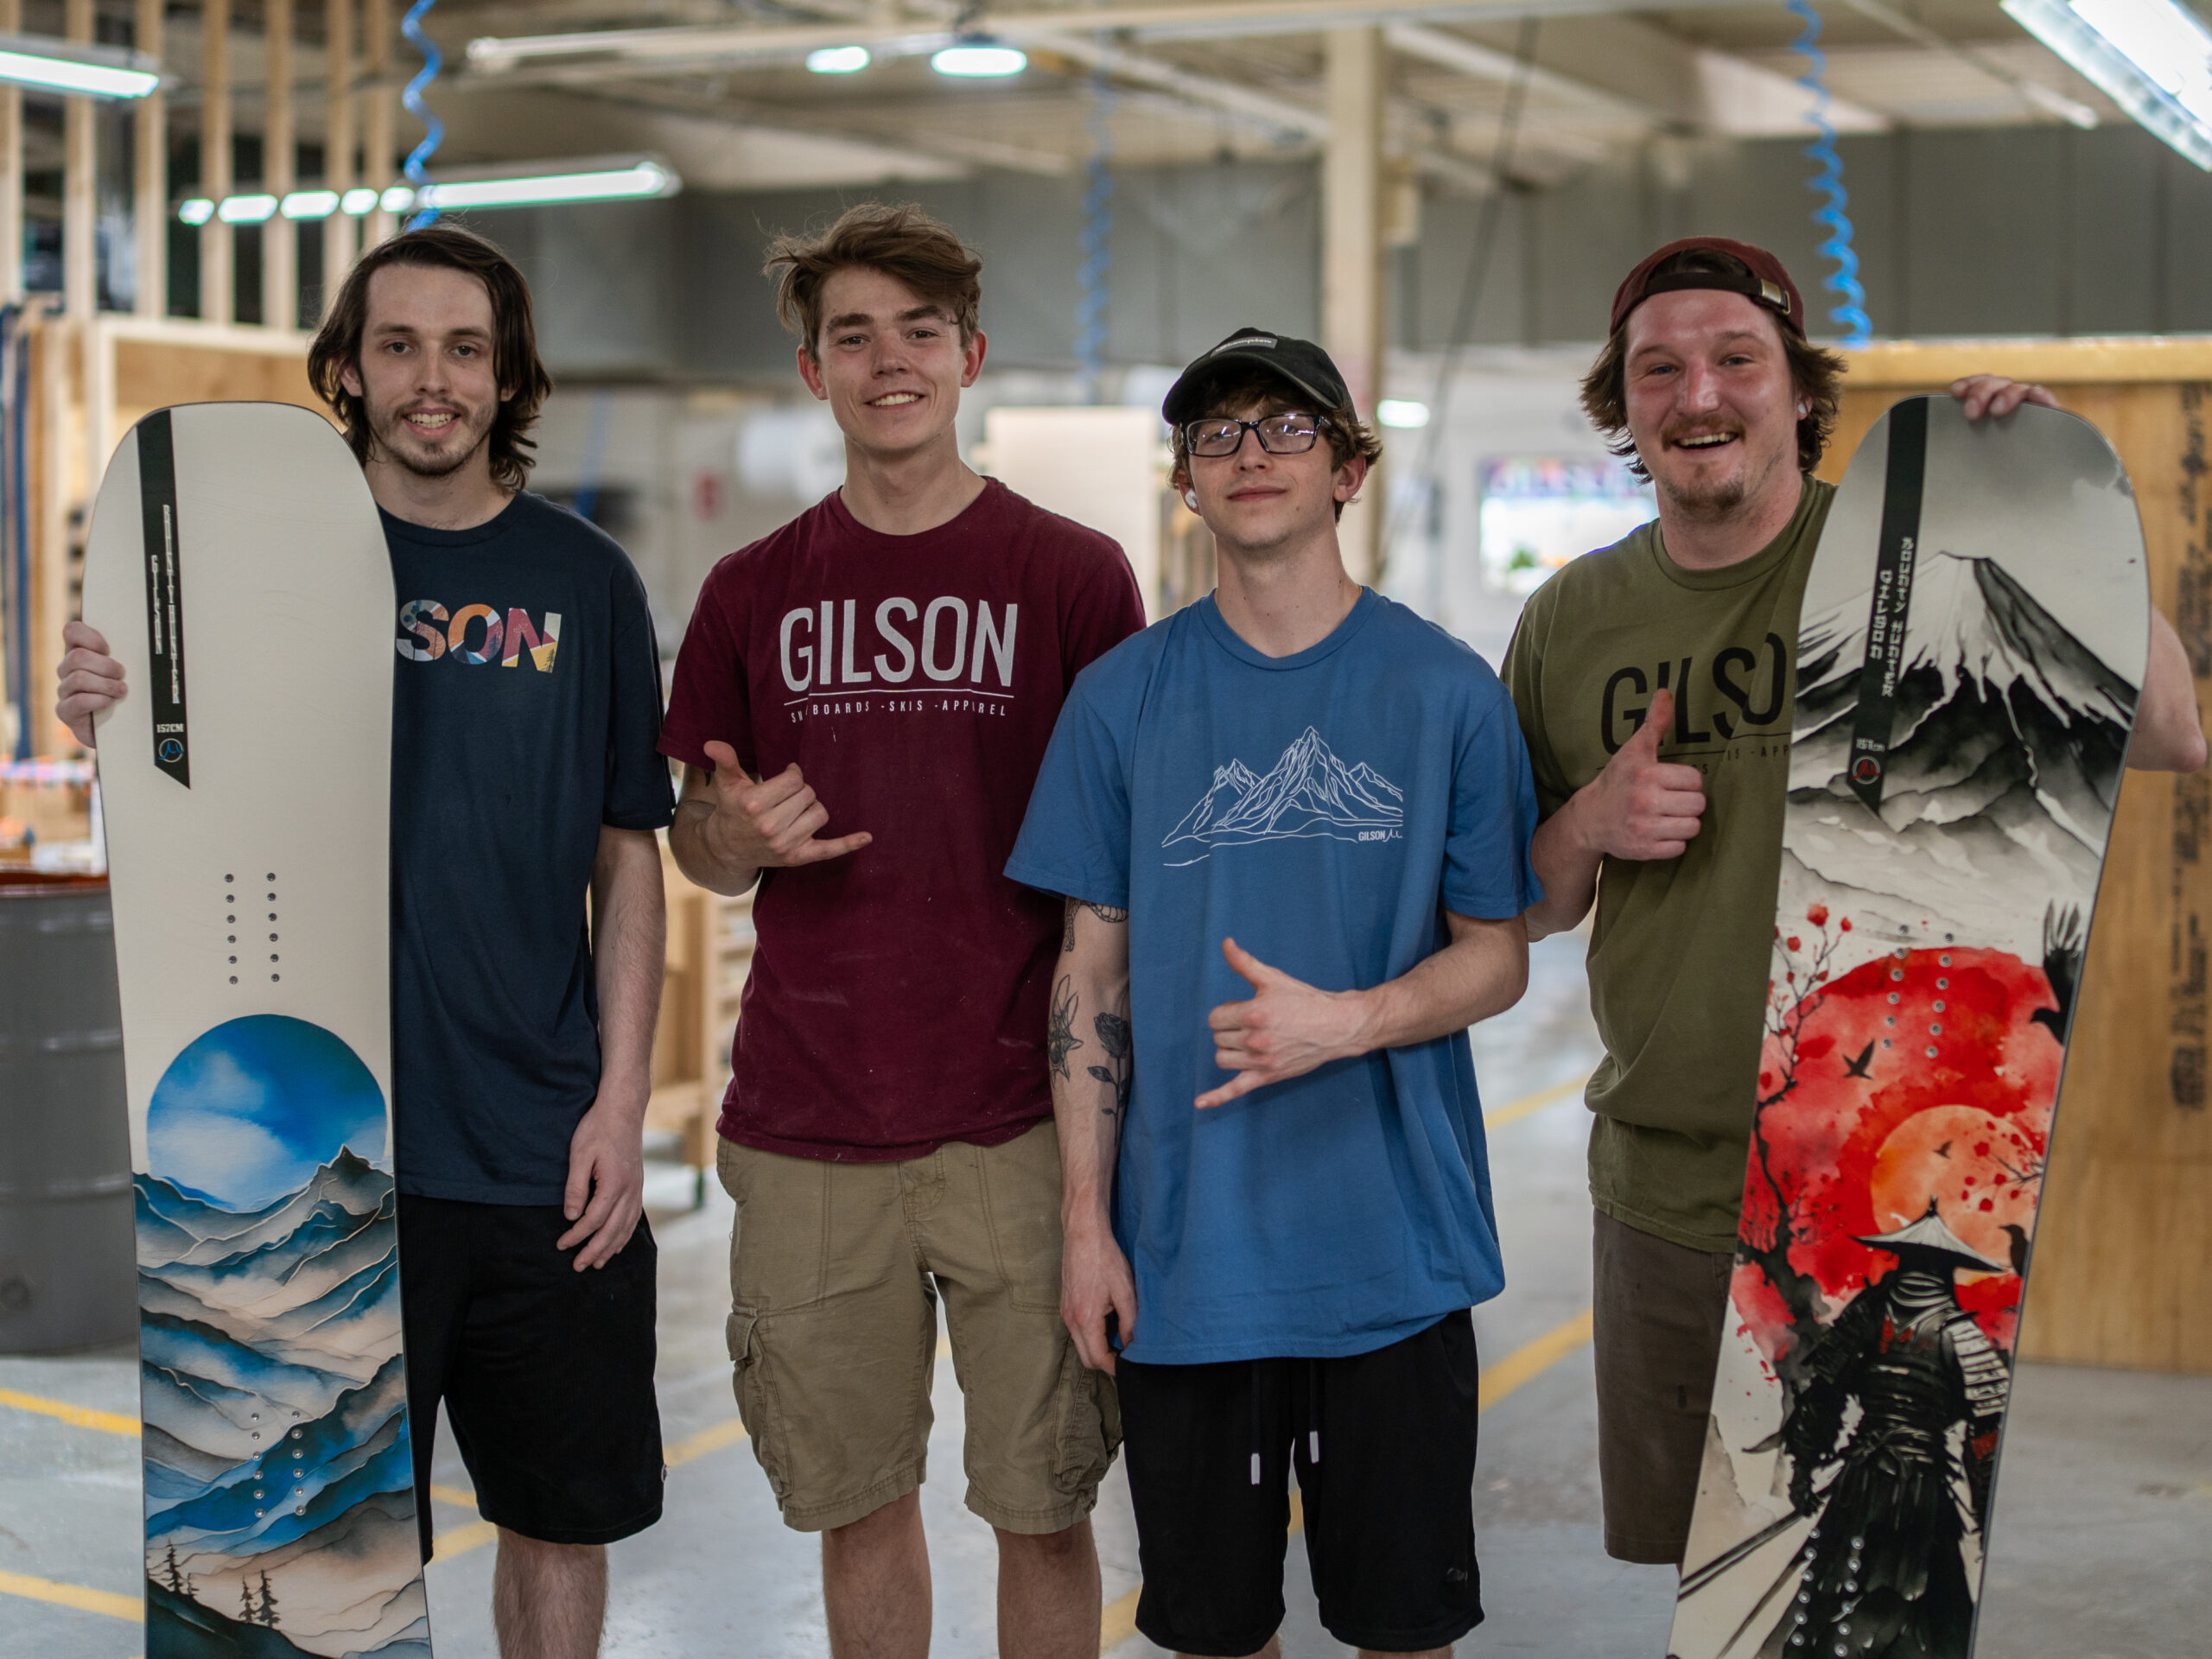 Four men wearing Gilson Snow shirts and holding snowboards